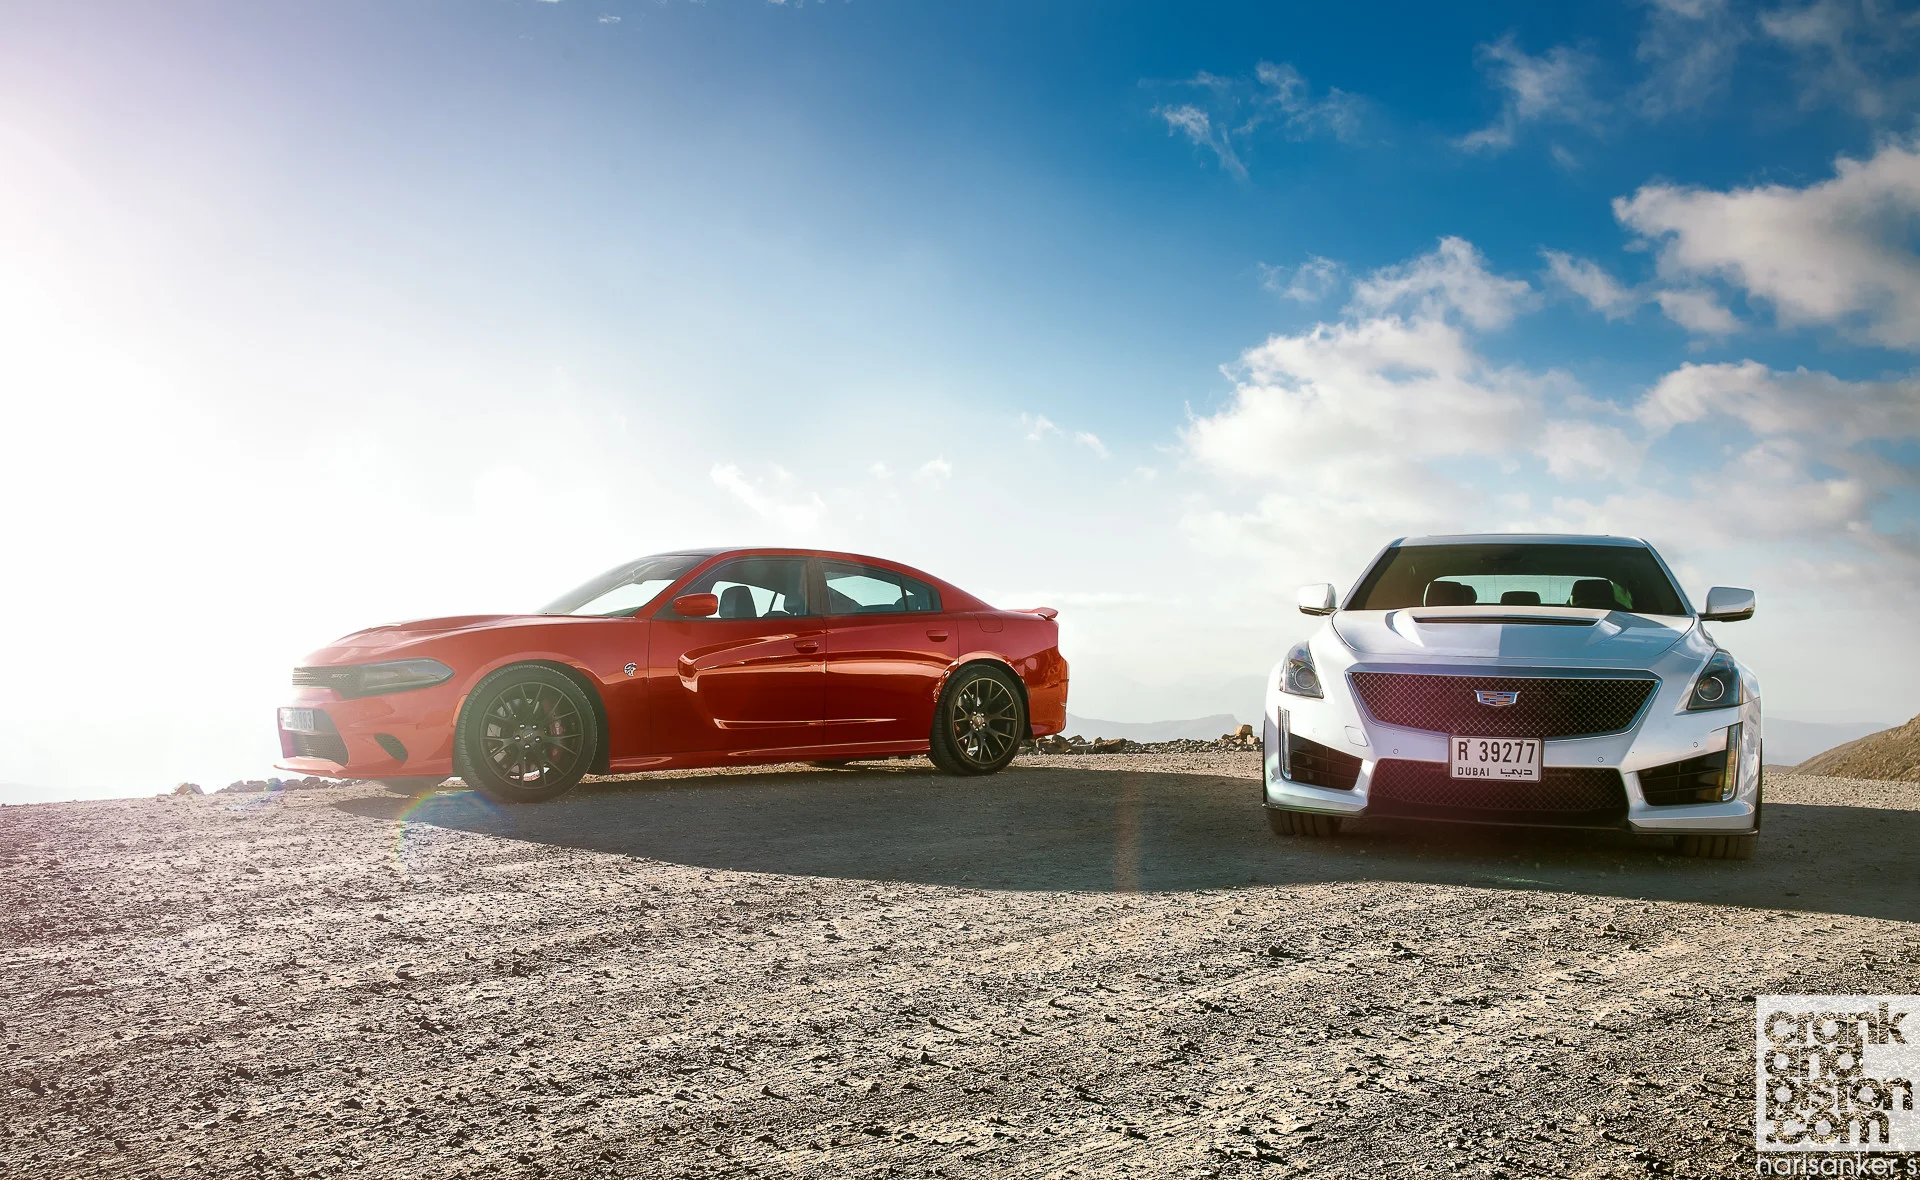 Full story available HERE Â· Cadillac CTS-V vs Dodge Charger SRT Hellcat  WALLPAPERS crankandpiston-1 …